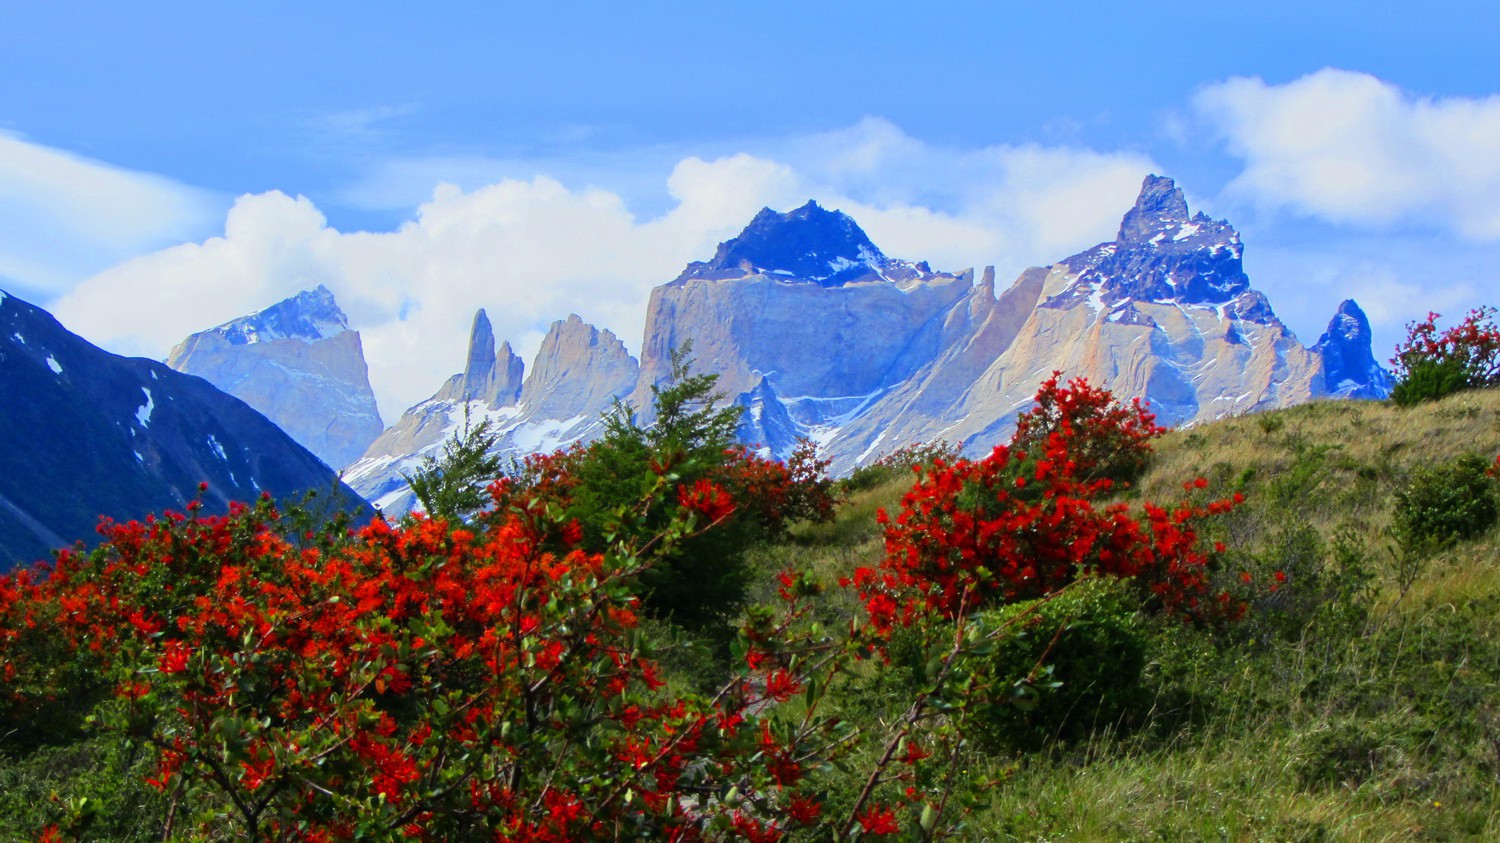 West side of the Cuernos del Paine